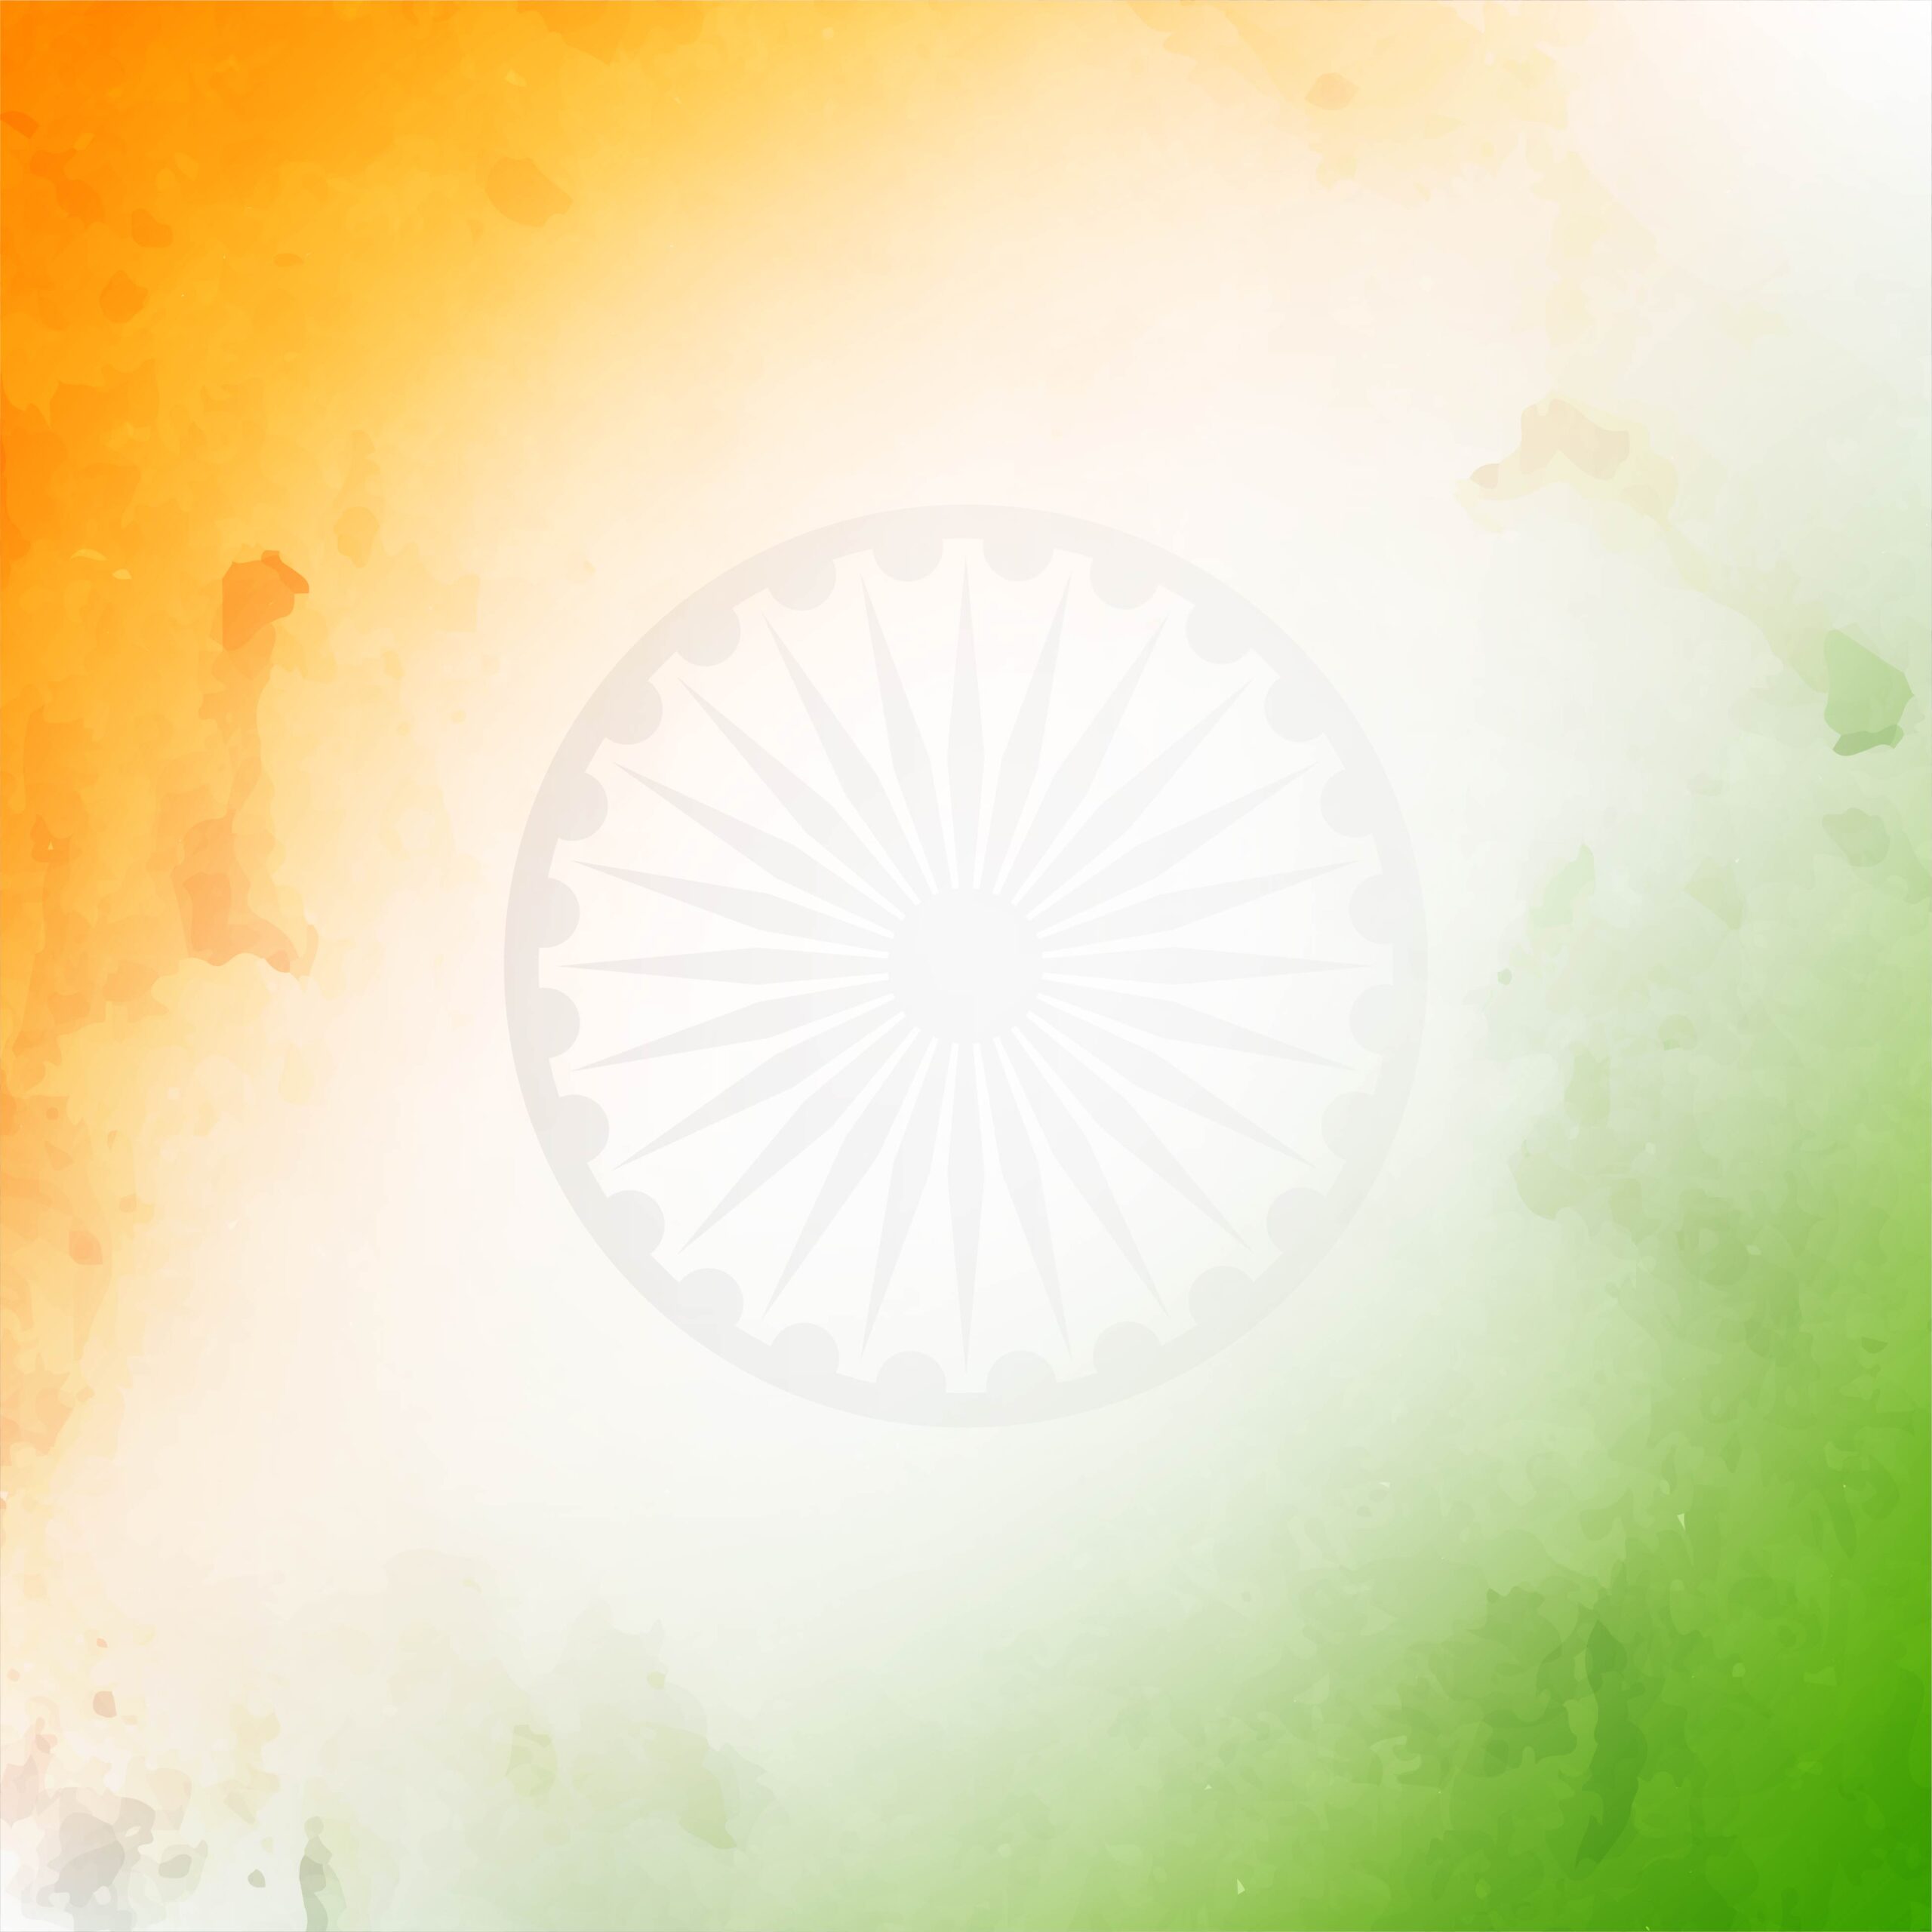 Details 100 independence day hd background - Abzlocal.mx